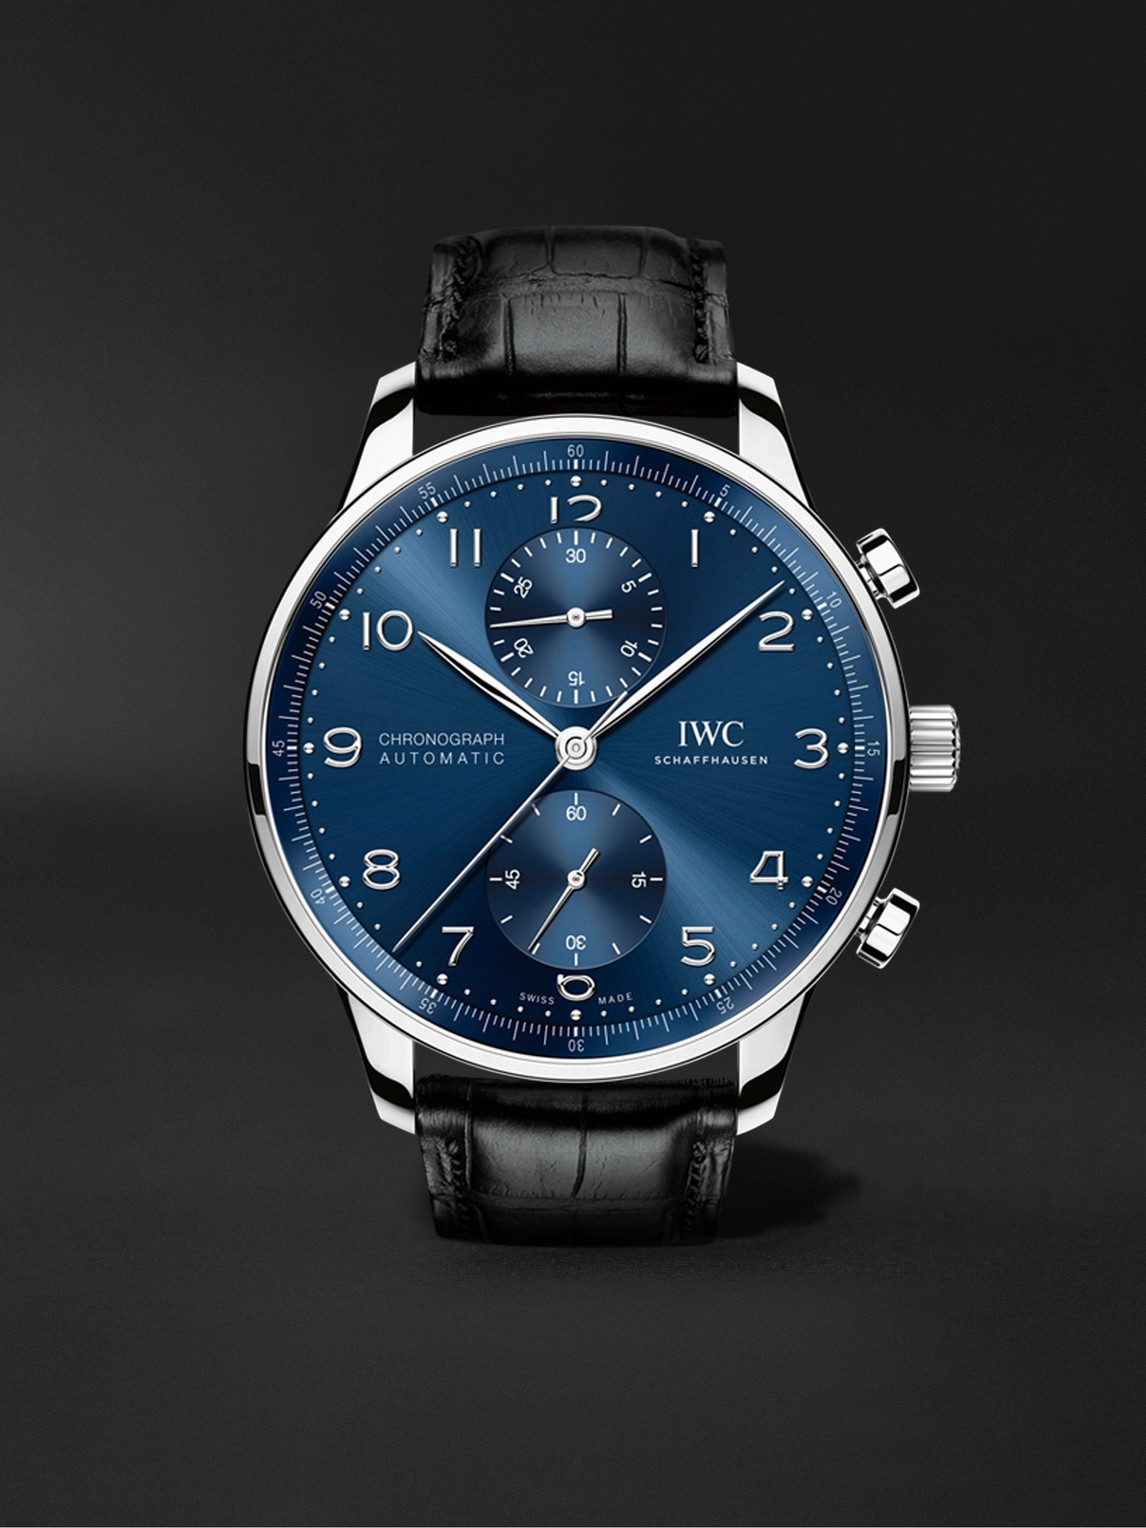 Iwc Schaffhausen Portugieser Automatic Chronograph 41mm Stainless Steel And Alligator Watch, Ref. No. Iw371606 In Blue